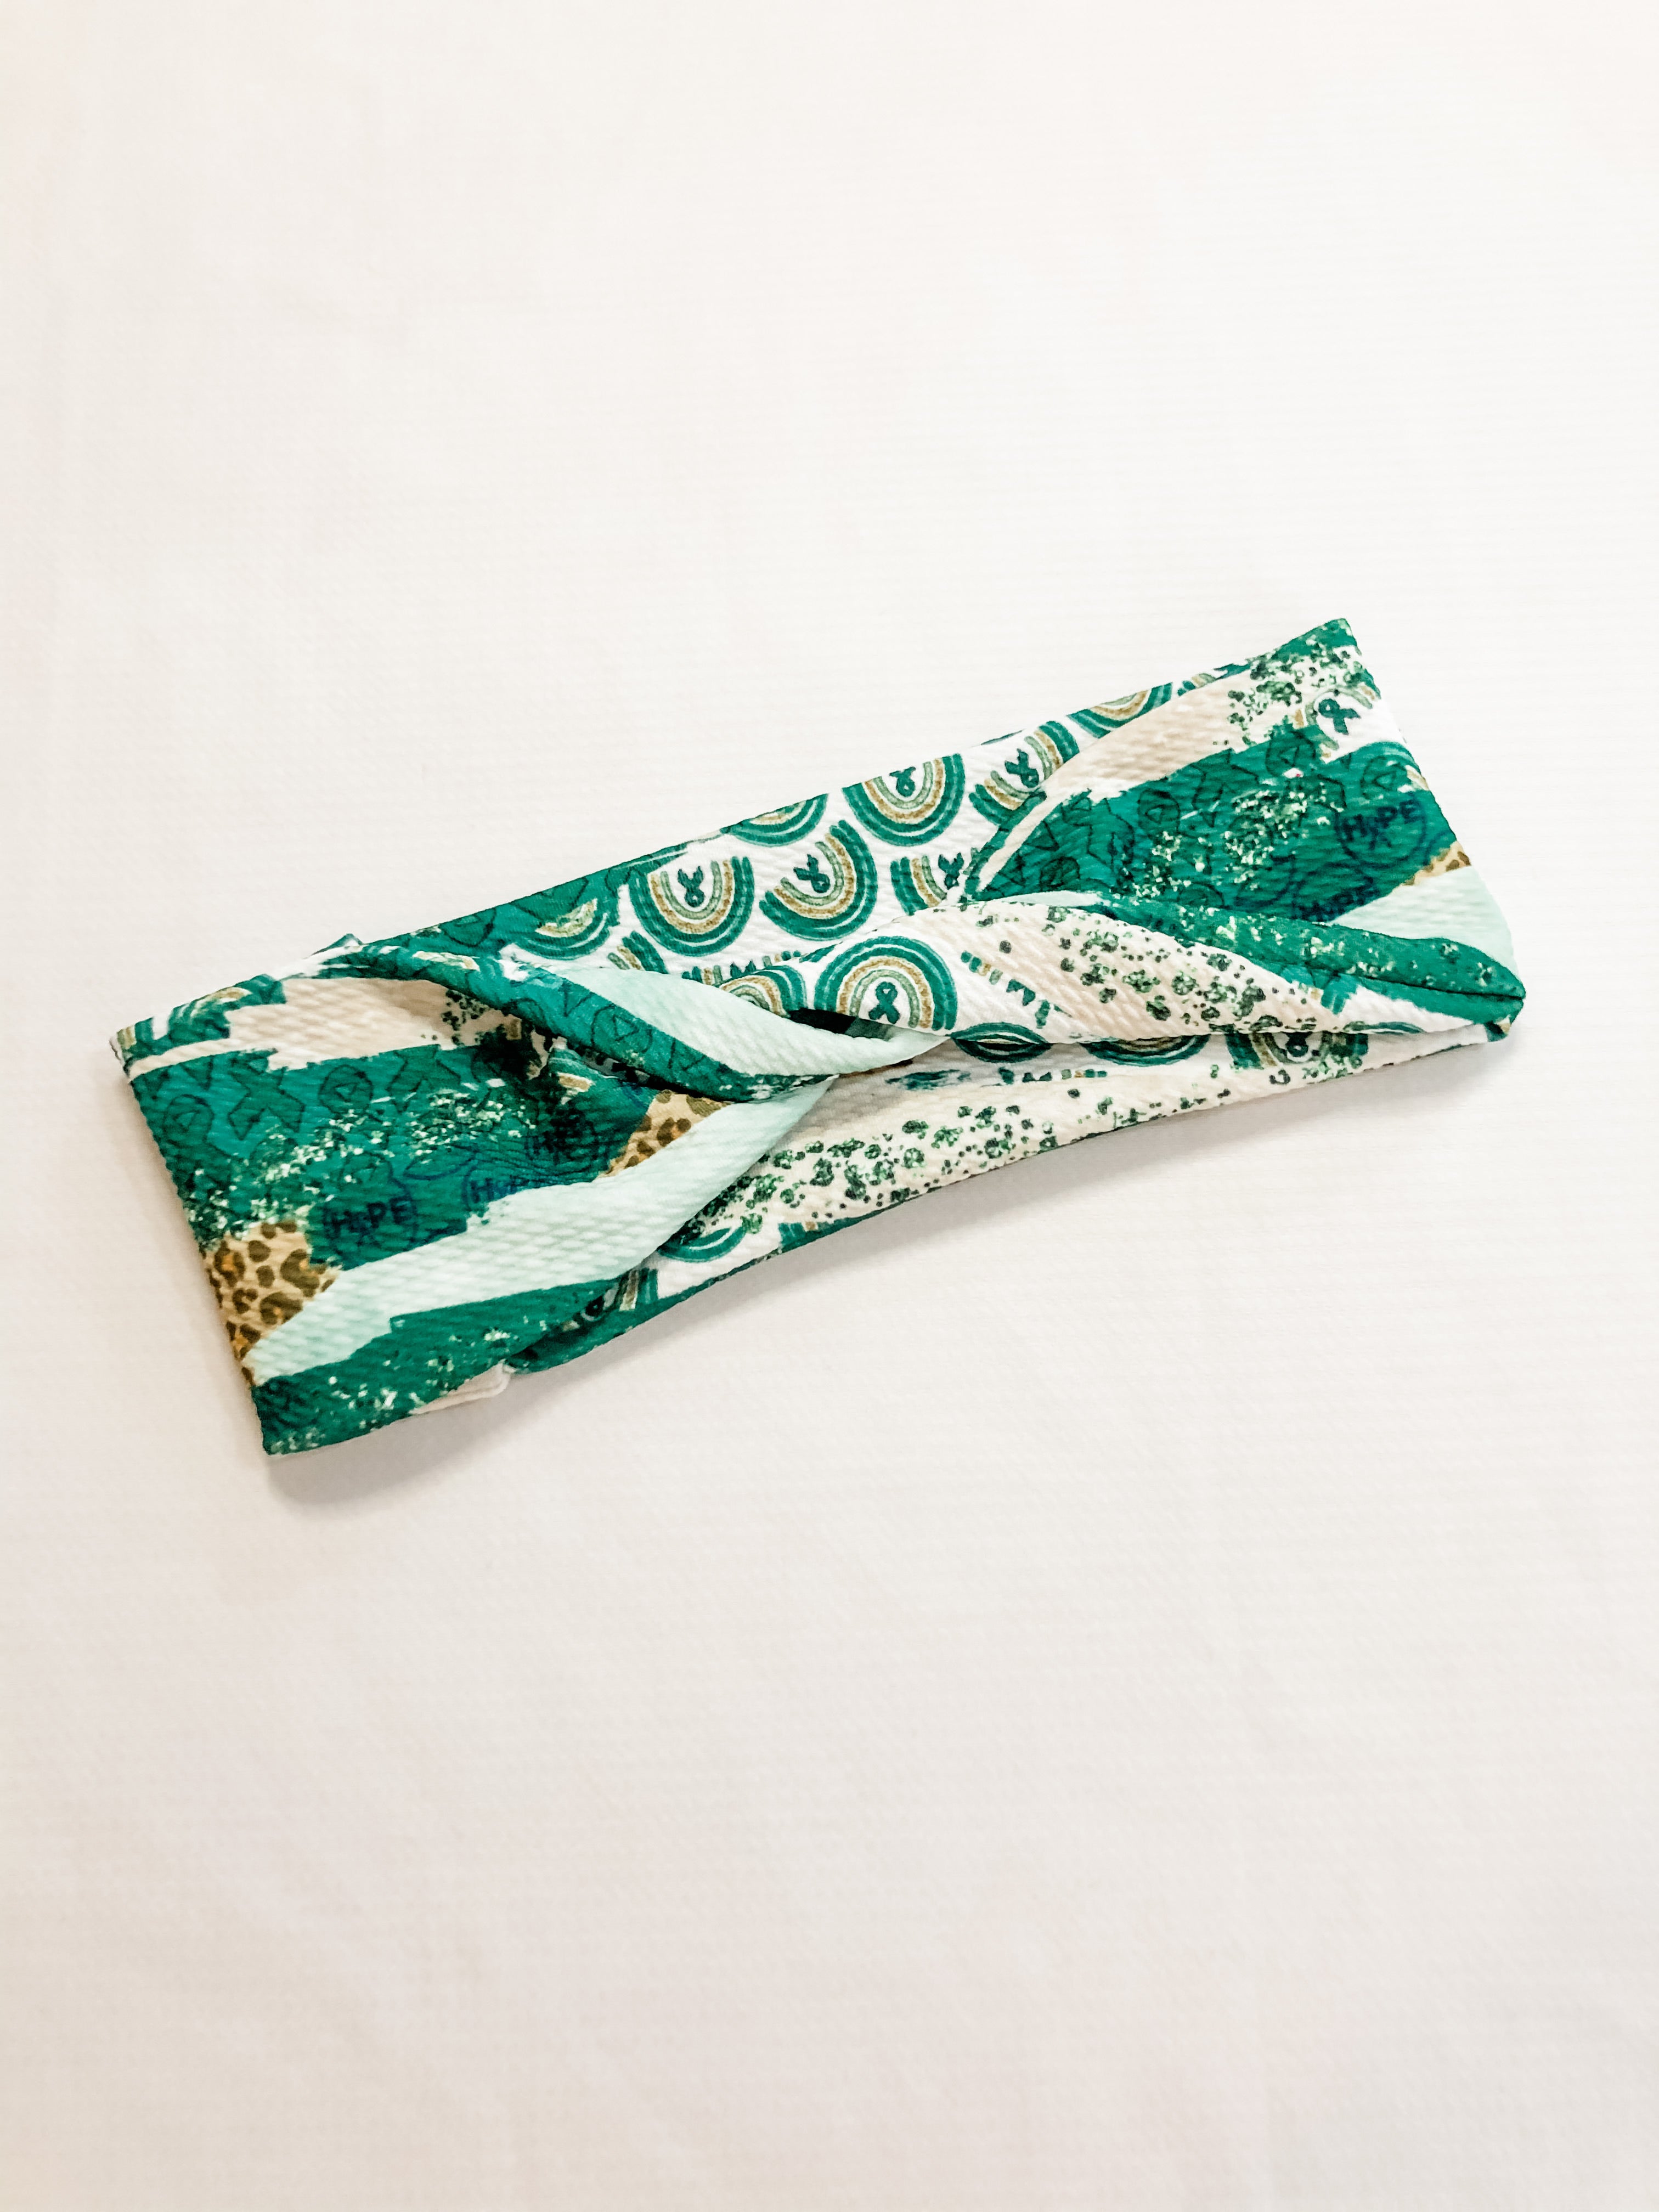 Jade/Green Awareness Bow and Hair Accessory Fabric